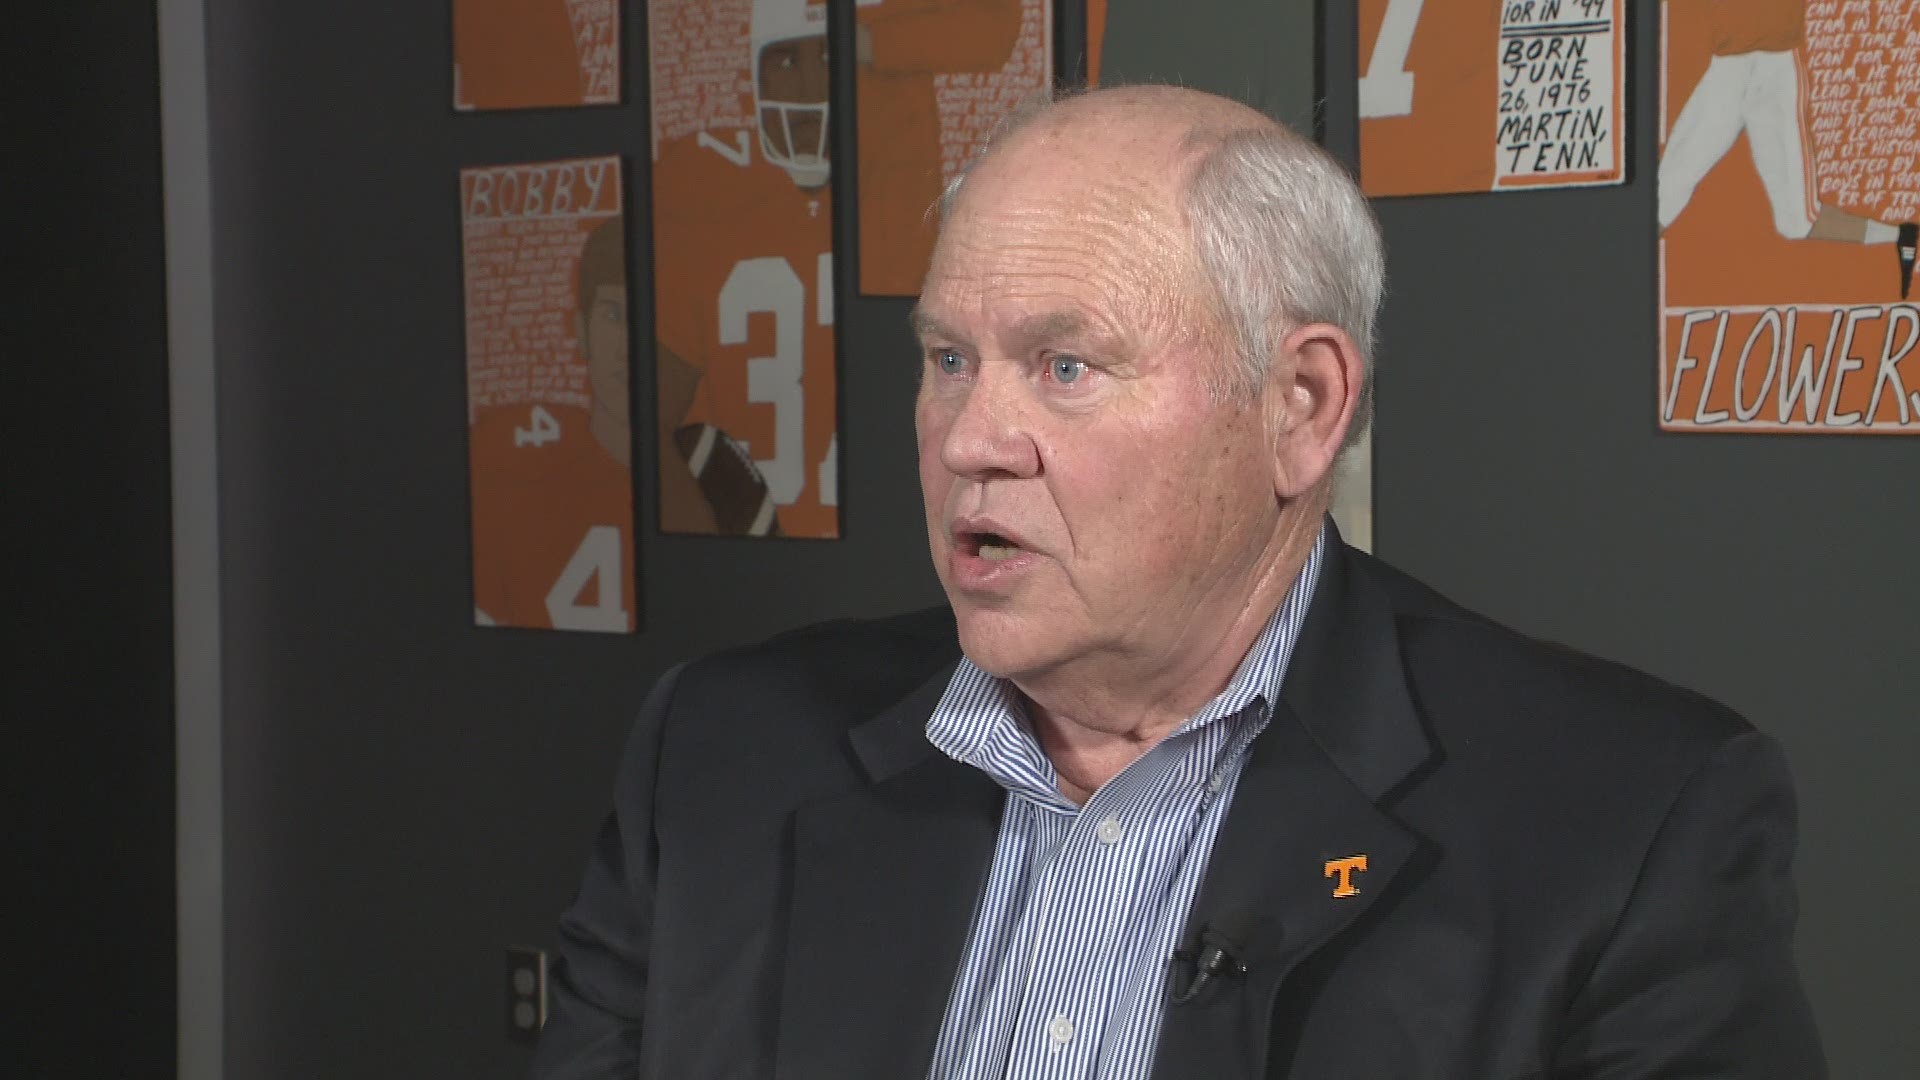 Tennessee AD Phillip Fulmer sits down with WBIR 10Sports anchor Patrick Murray to discuss his hiring of Jeremy Pruitt, his impressions of the new head football coach so far and what it was like for Fulmer to be back out making visits and helping with recr